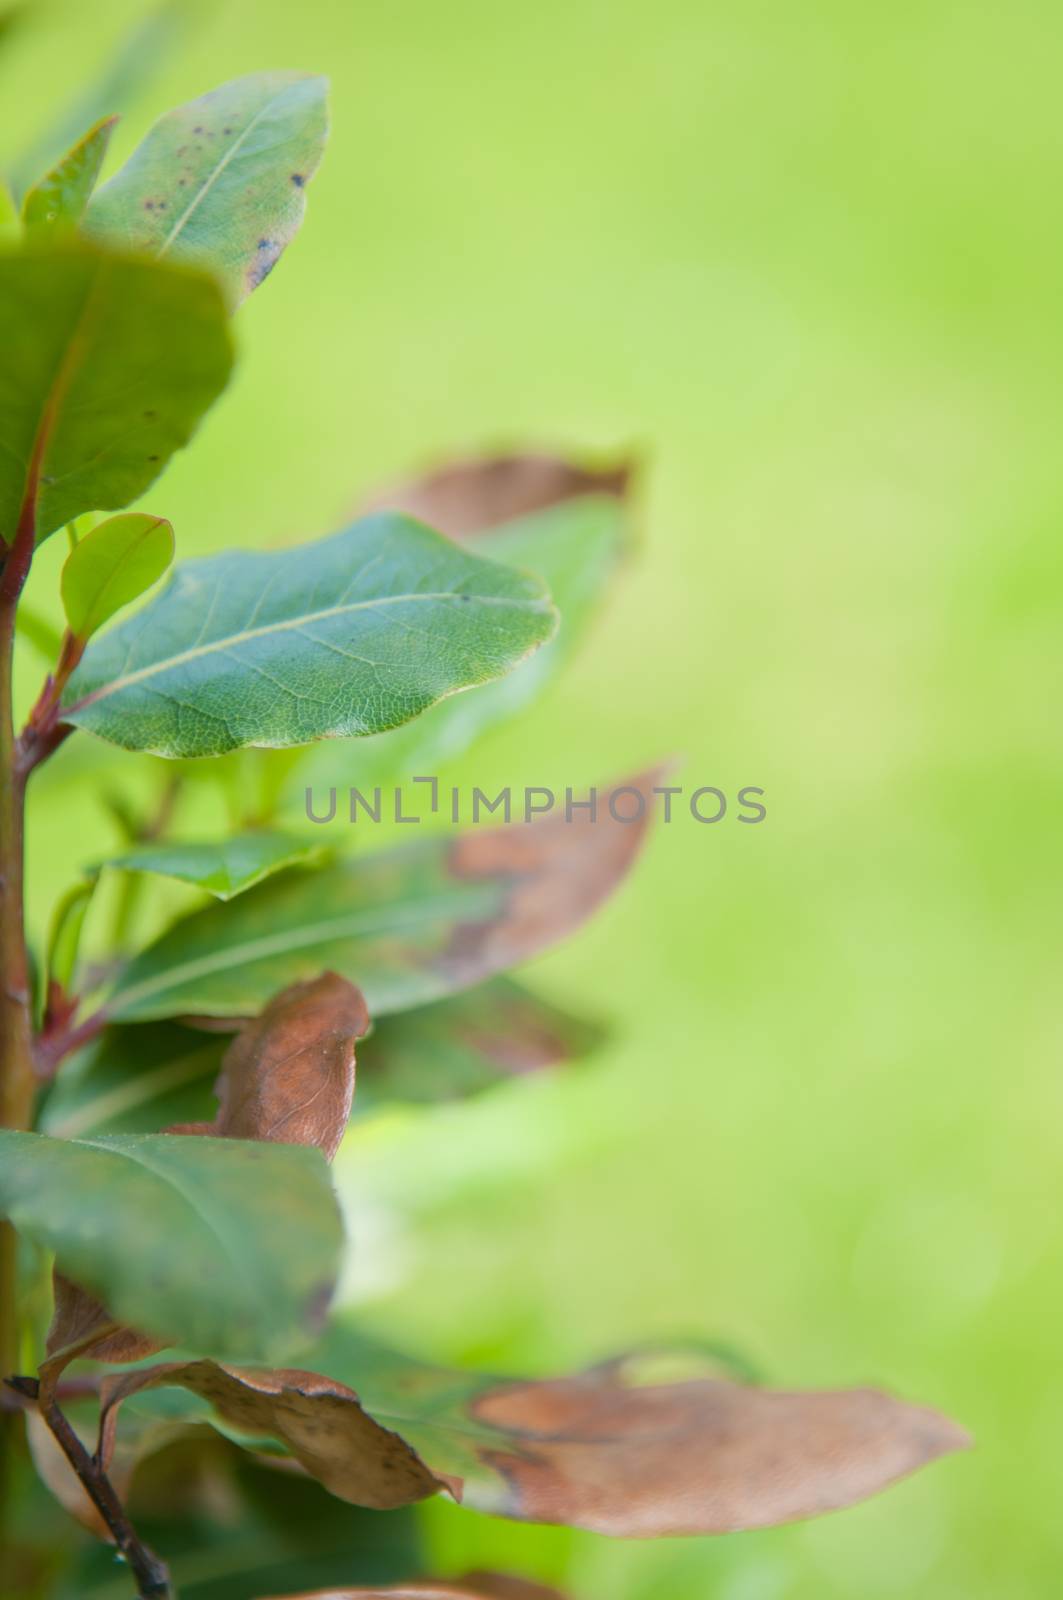 Bay tree Laurus nobilis with blurred green background, shallow depth of field